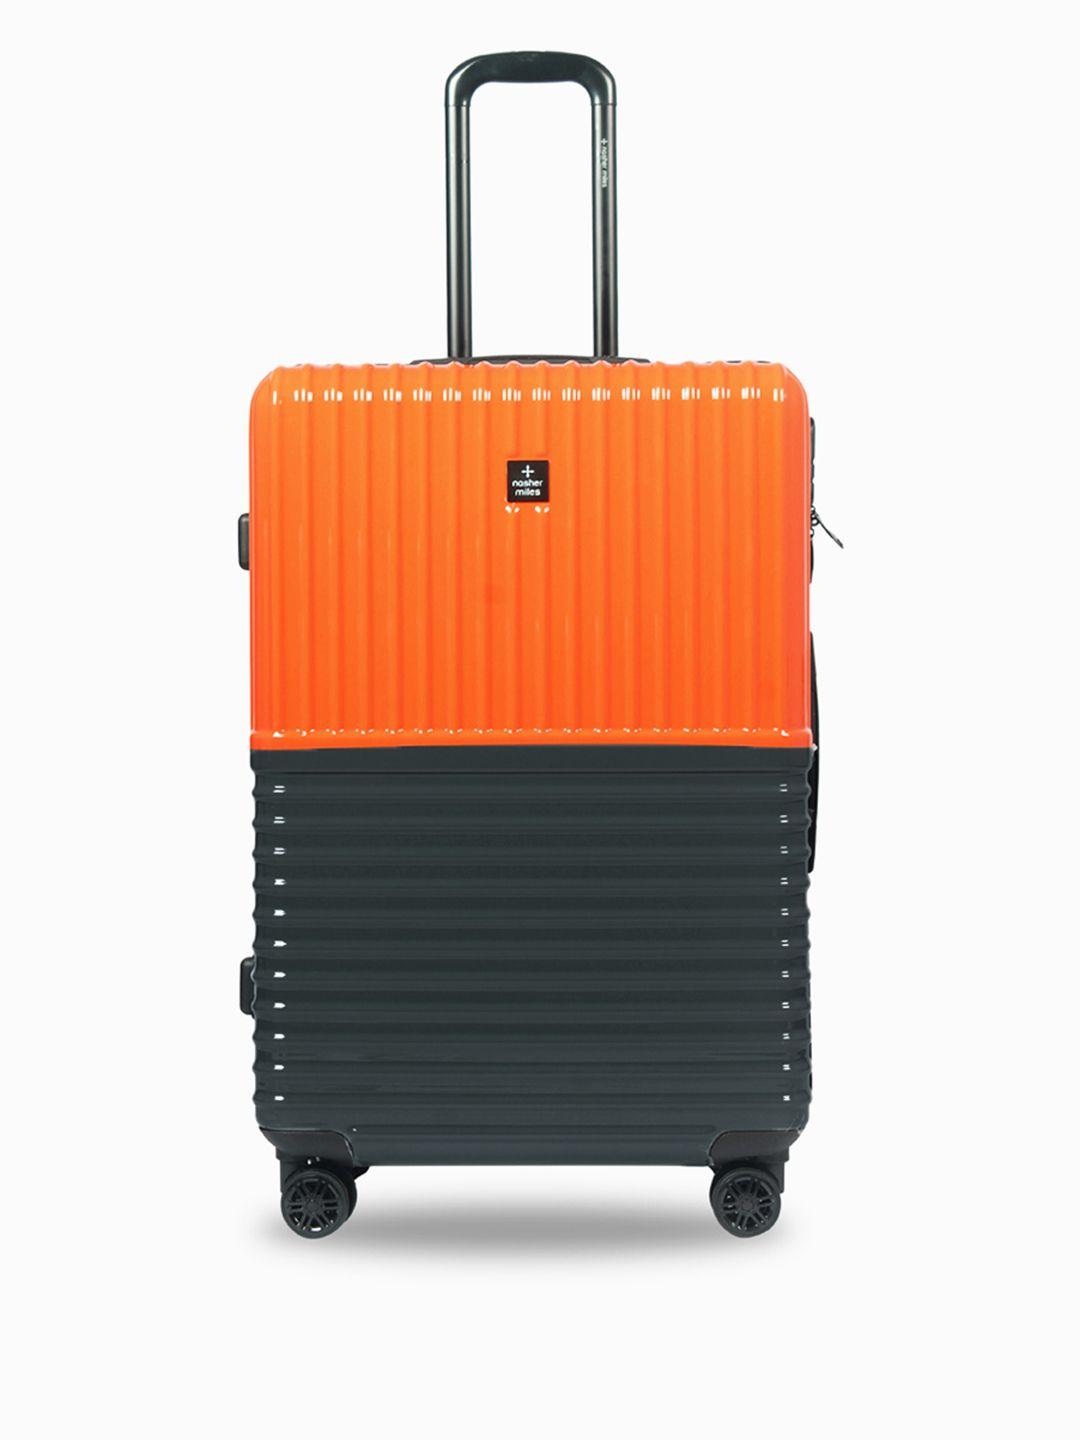 nasher-miles-textured-hard-sided-cabin-trolley-suitcase